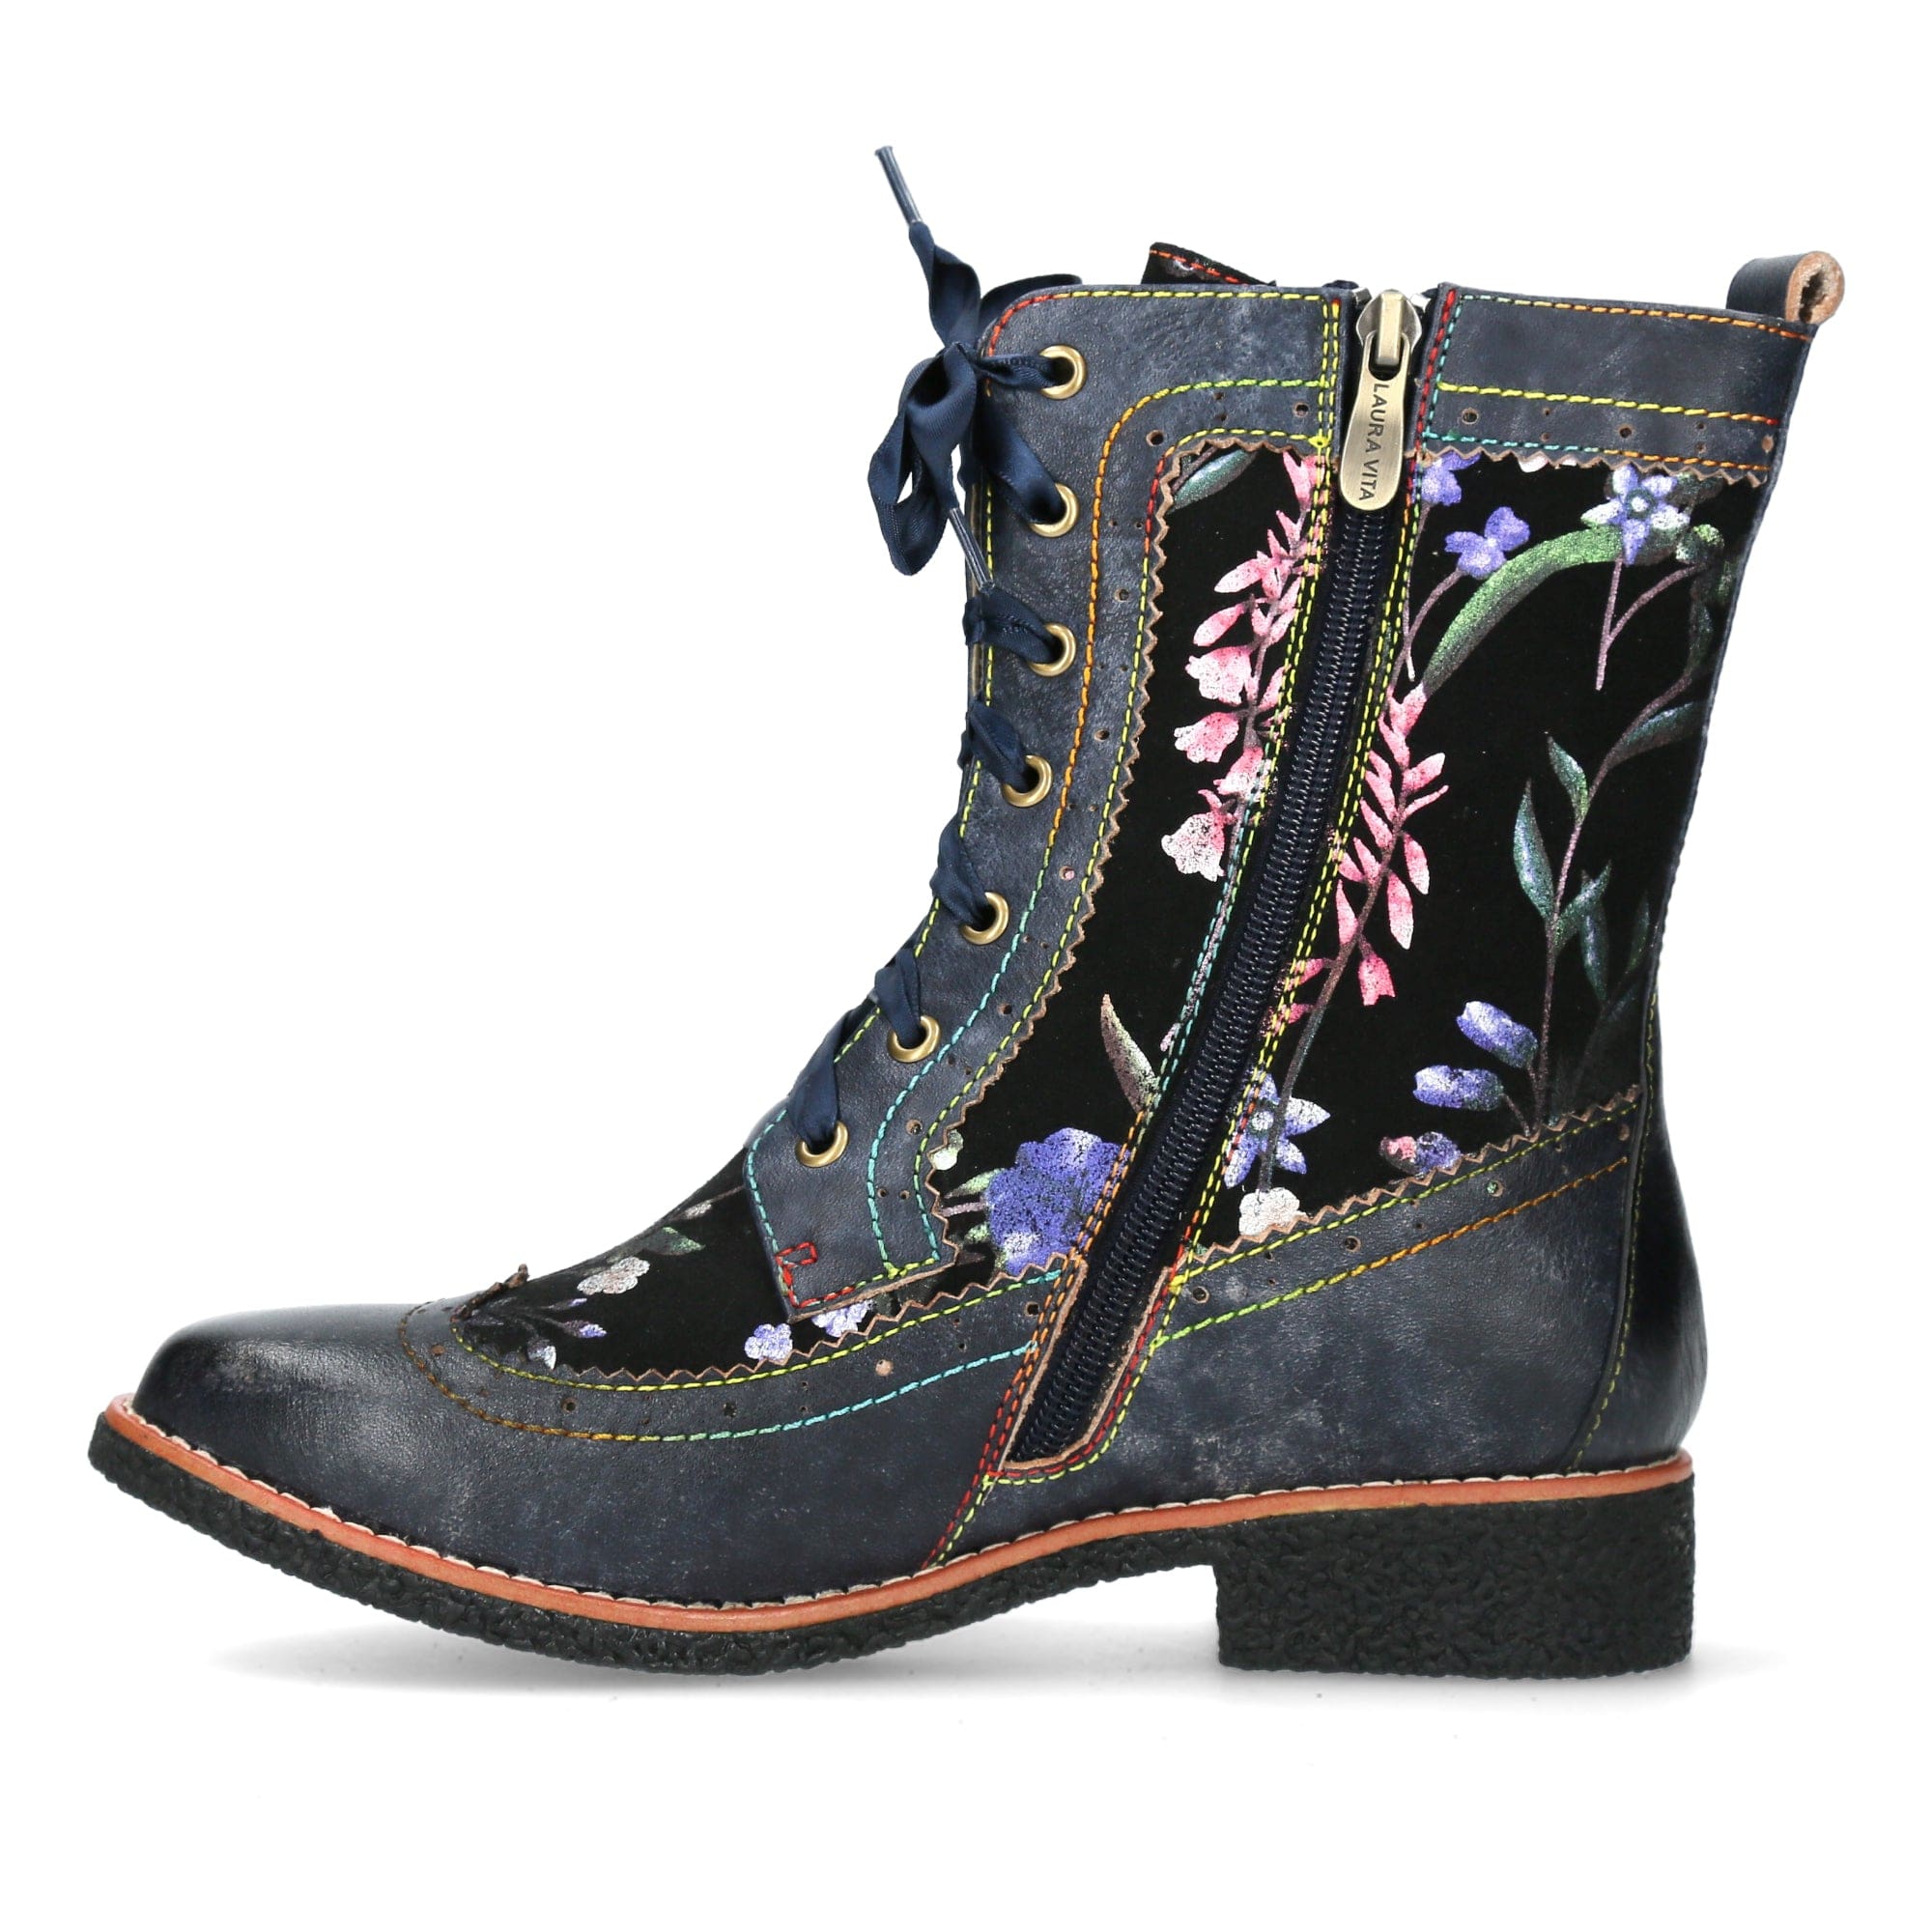 Schuh COCRALIEO 62 - Boots